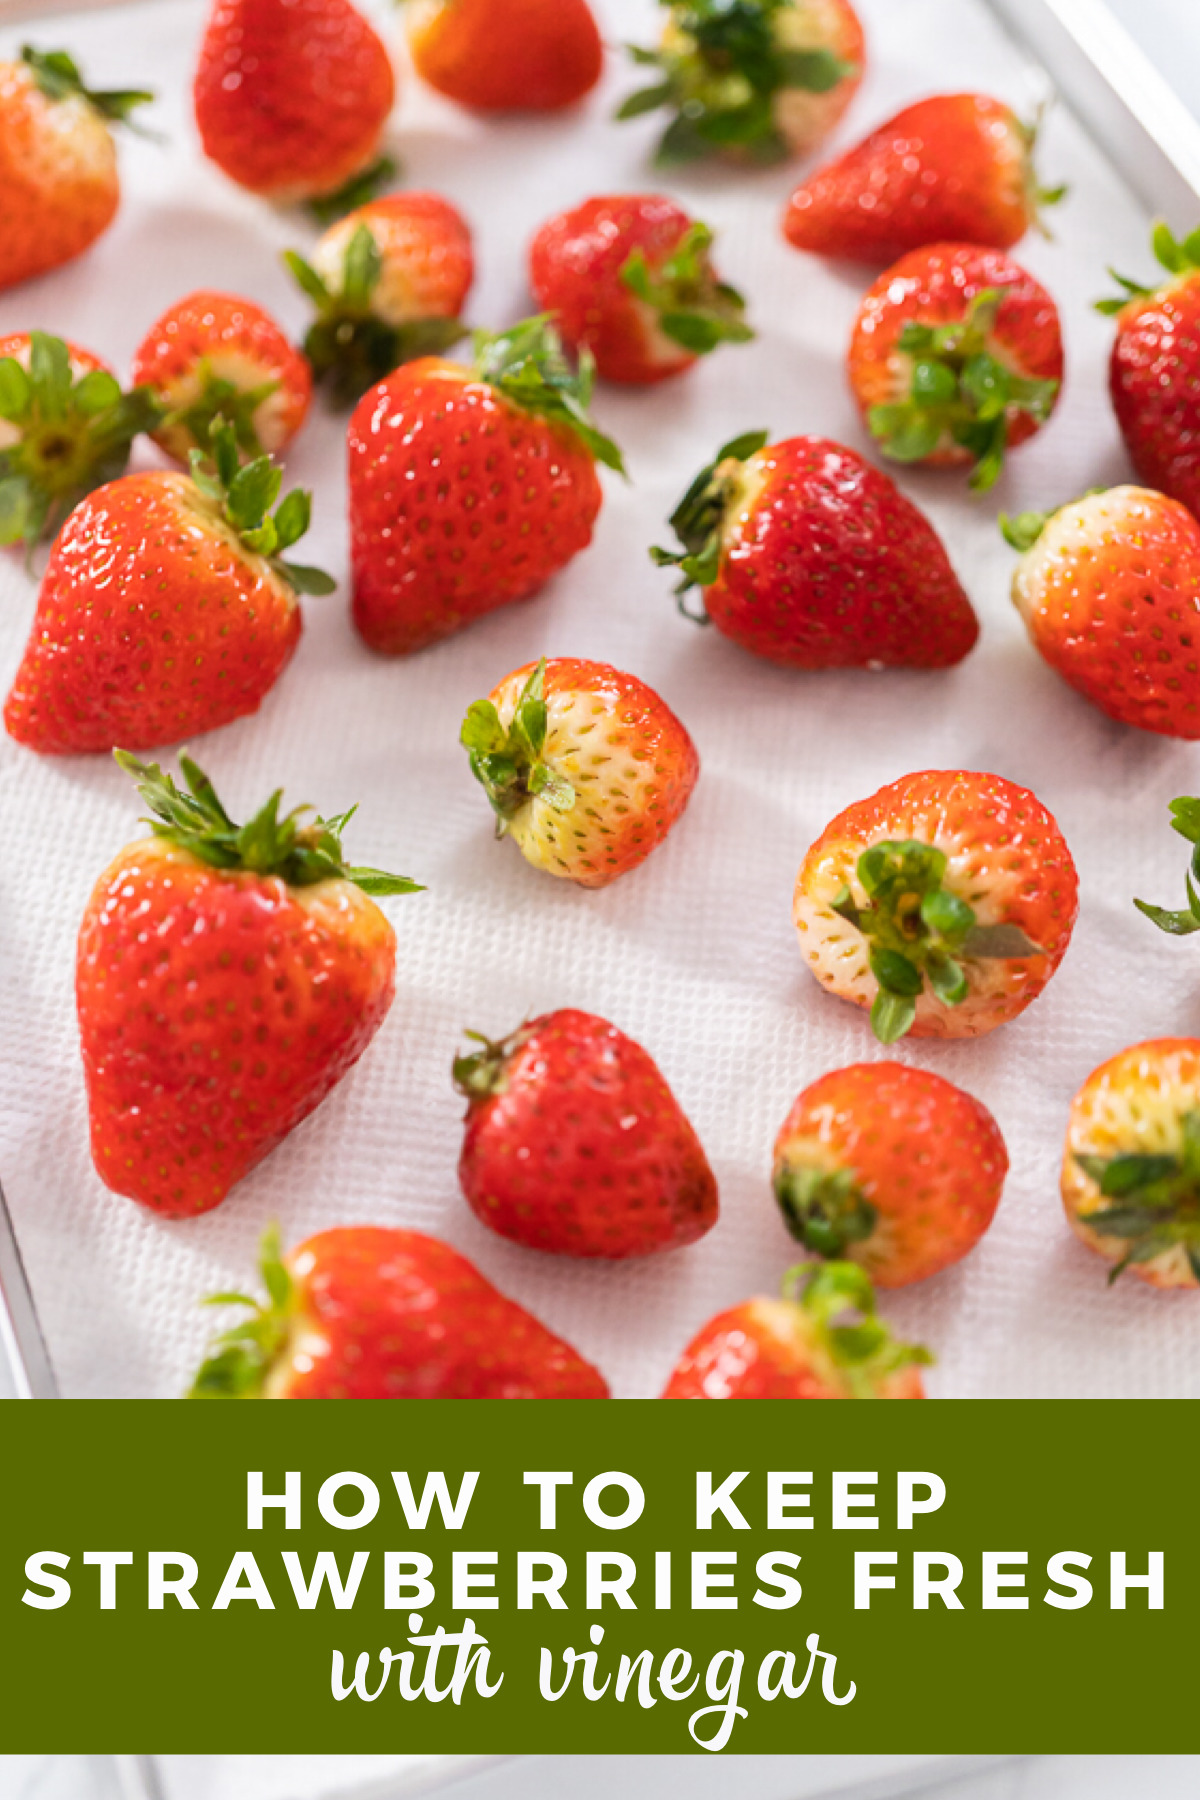 How to keep strawberries fresh with vinegar